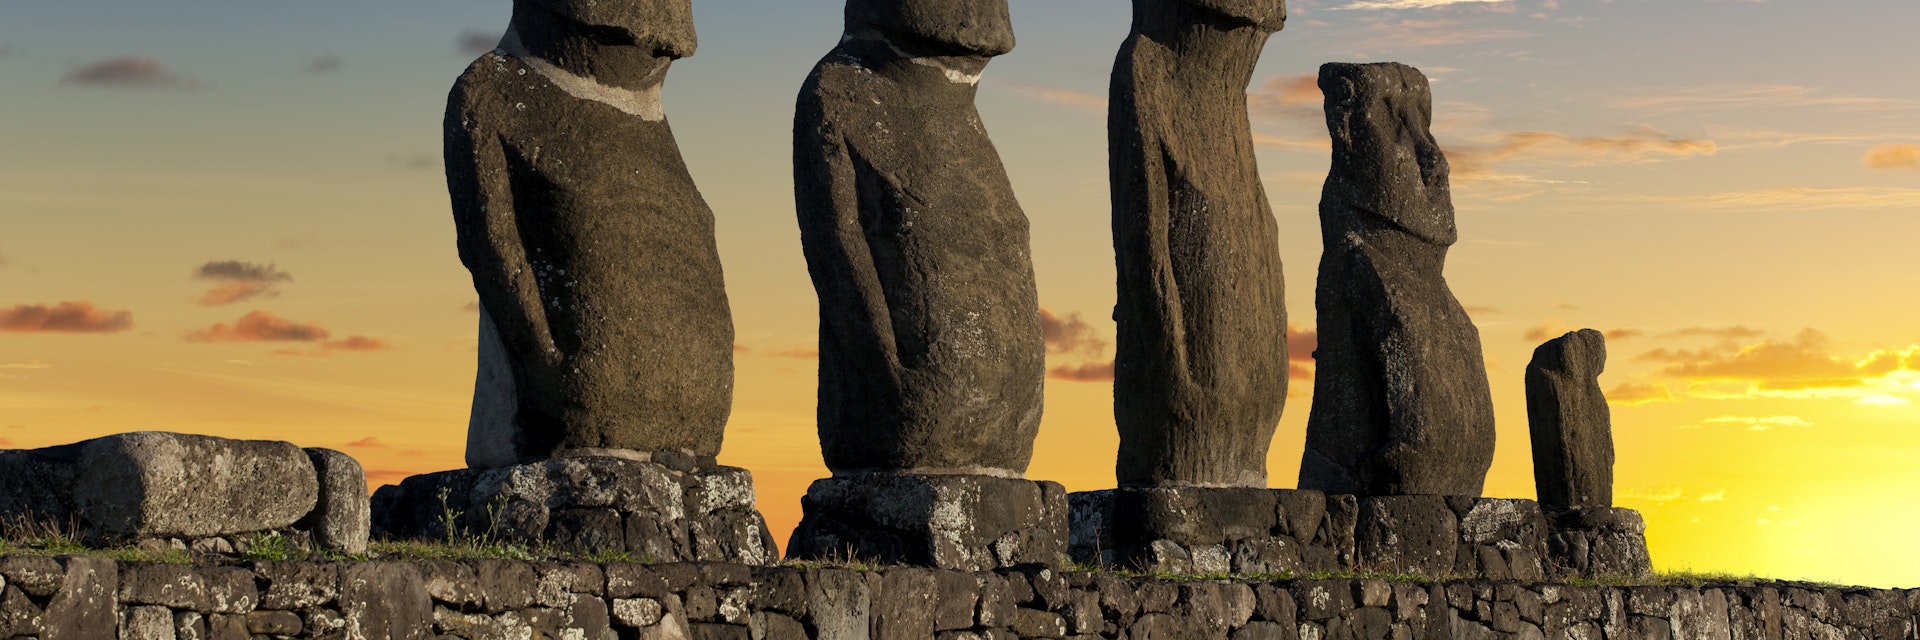 Dawn over Moais at Ahu Tahai on Easter Island Chile